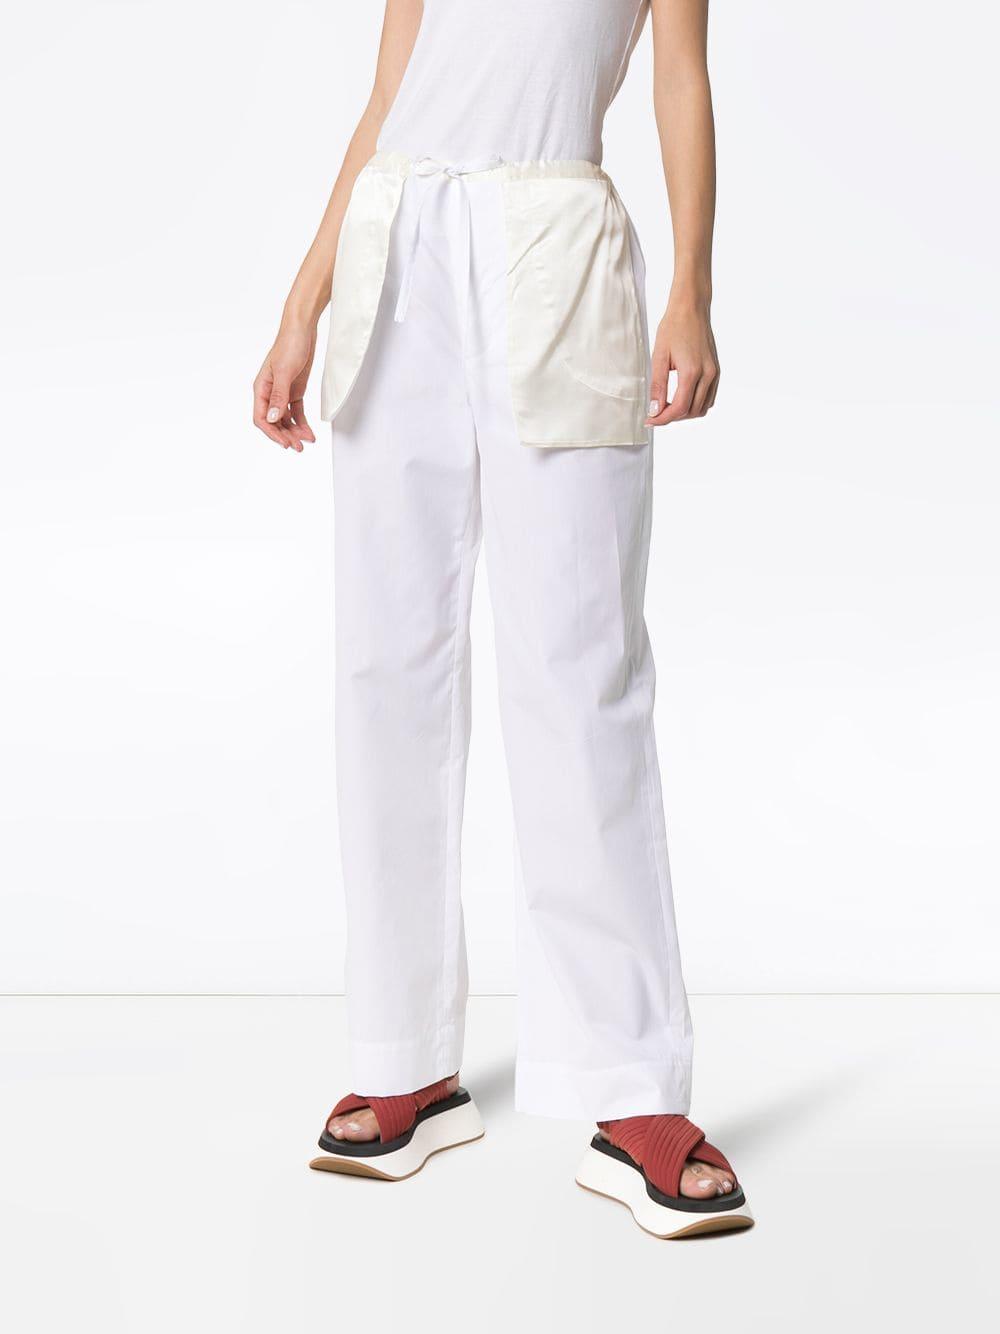 Marni Synthetic Drawstring Trousers in White - Lyst